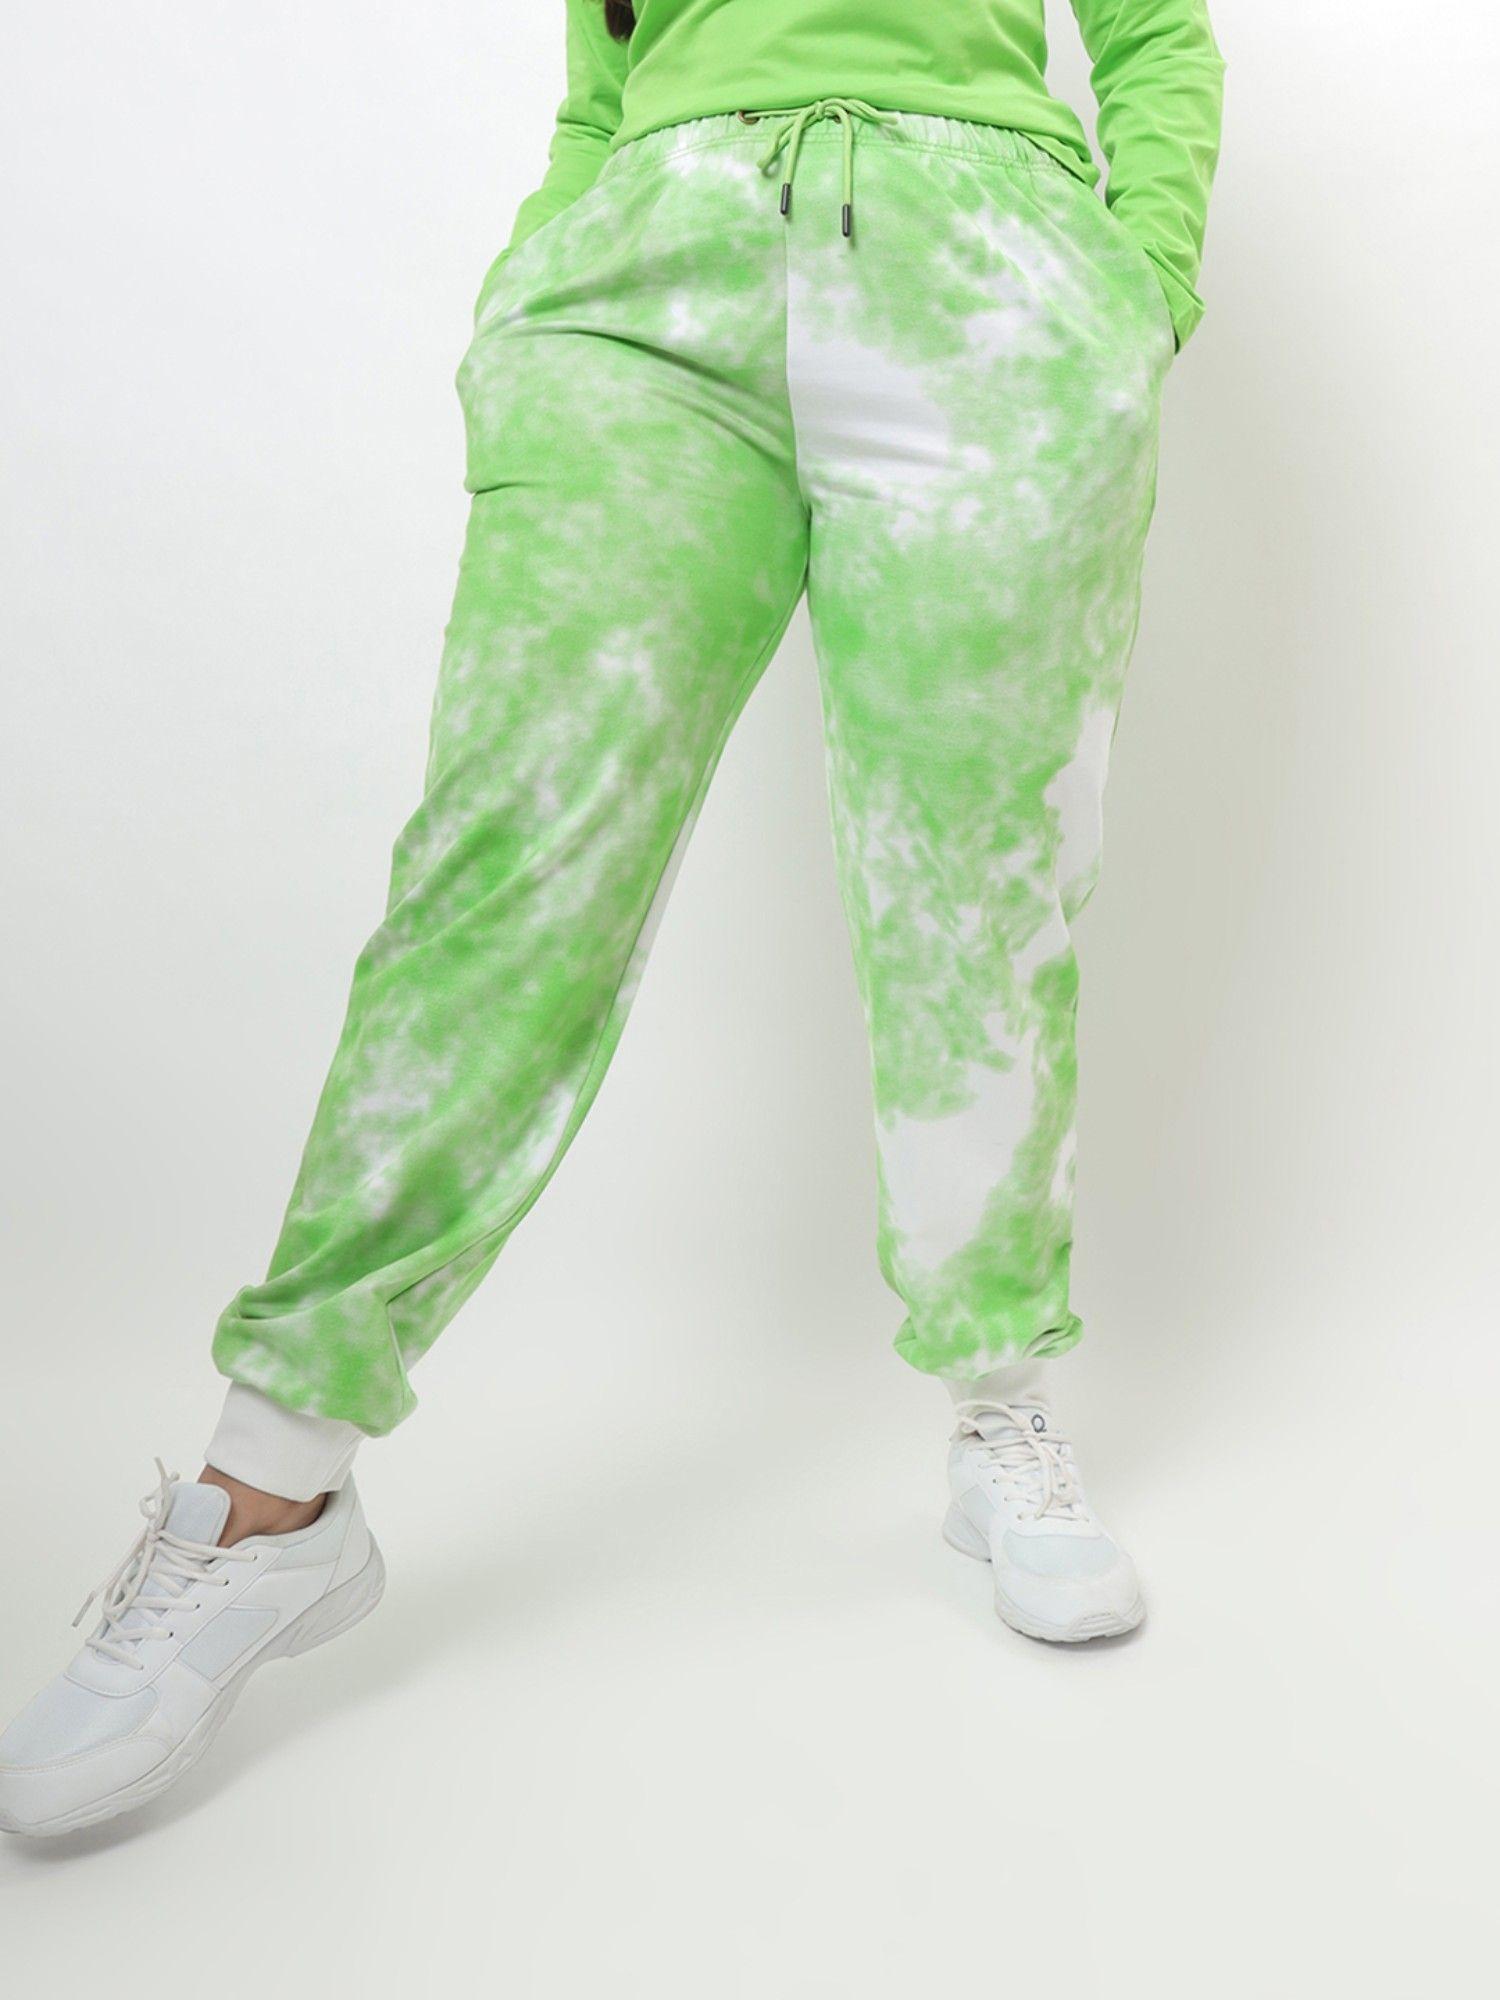 womens chilled out green and white plus size tie and dye joggers